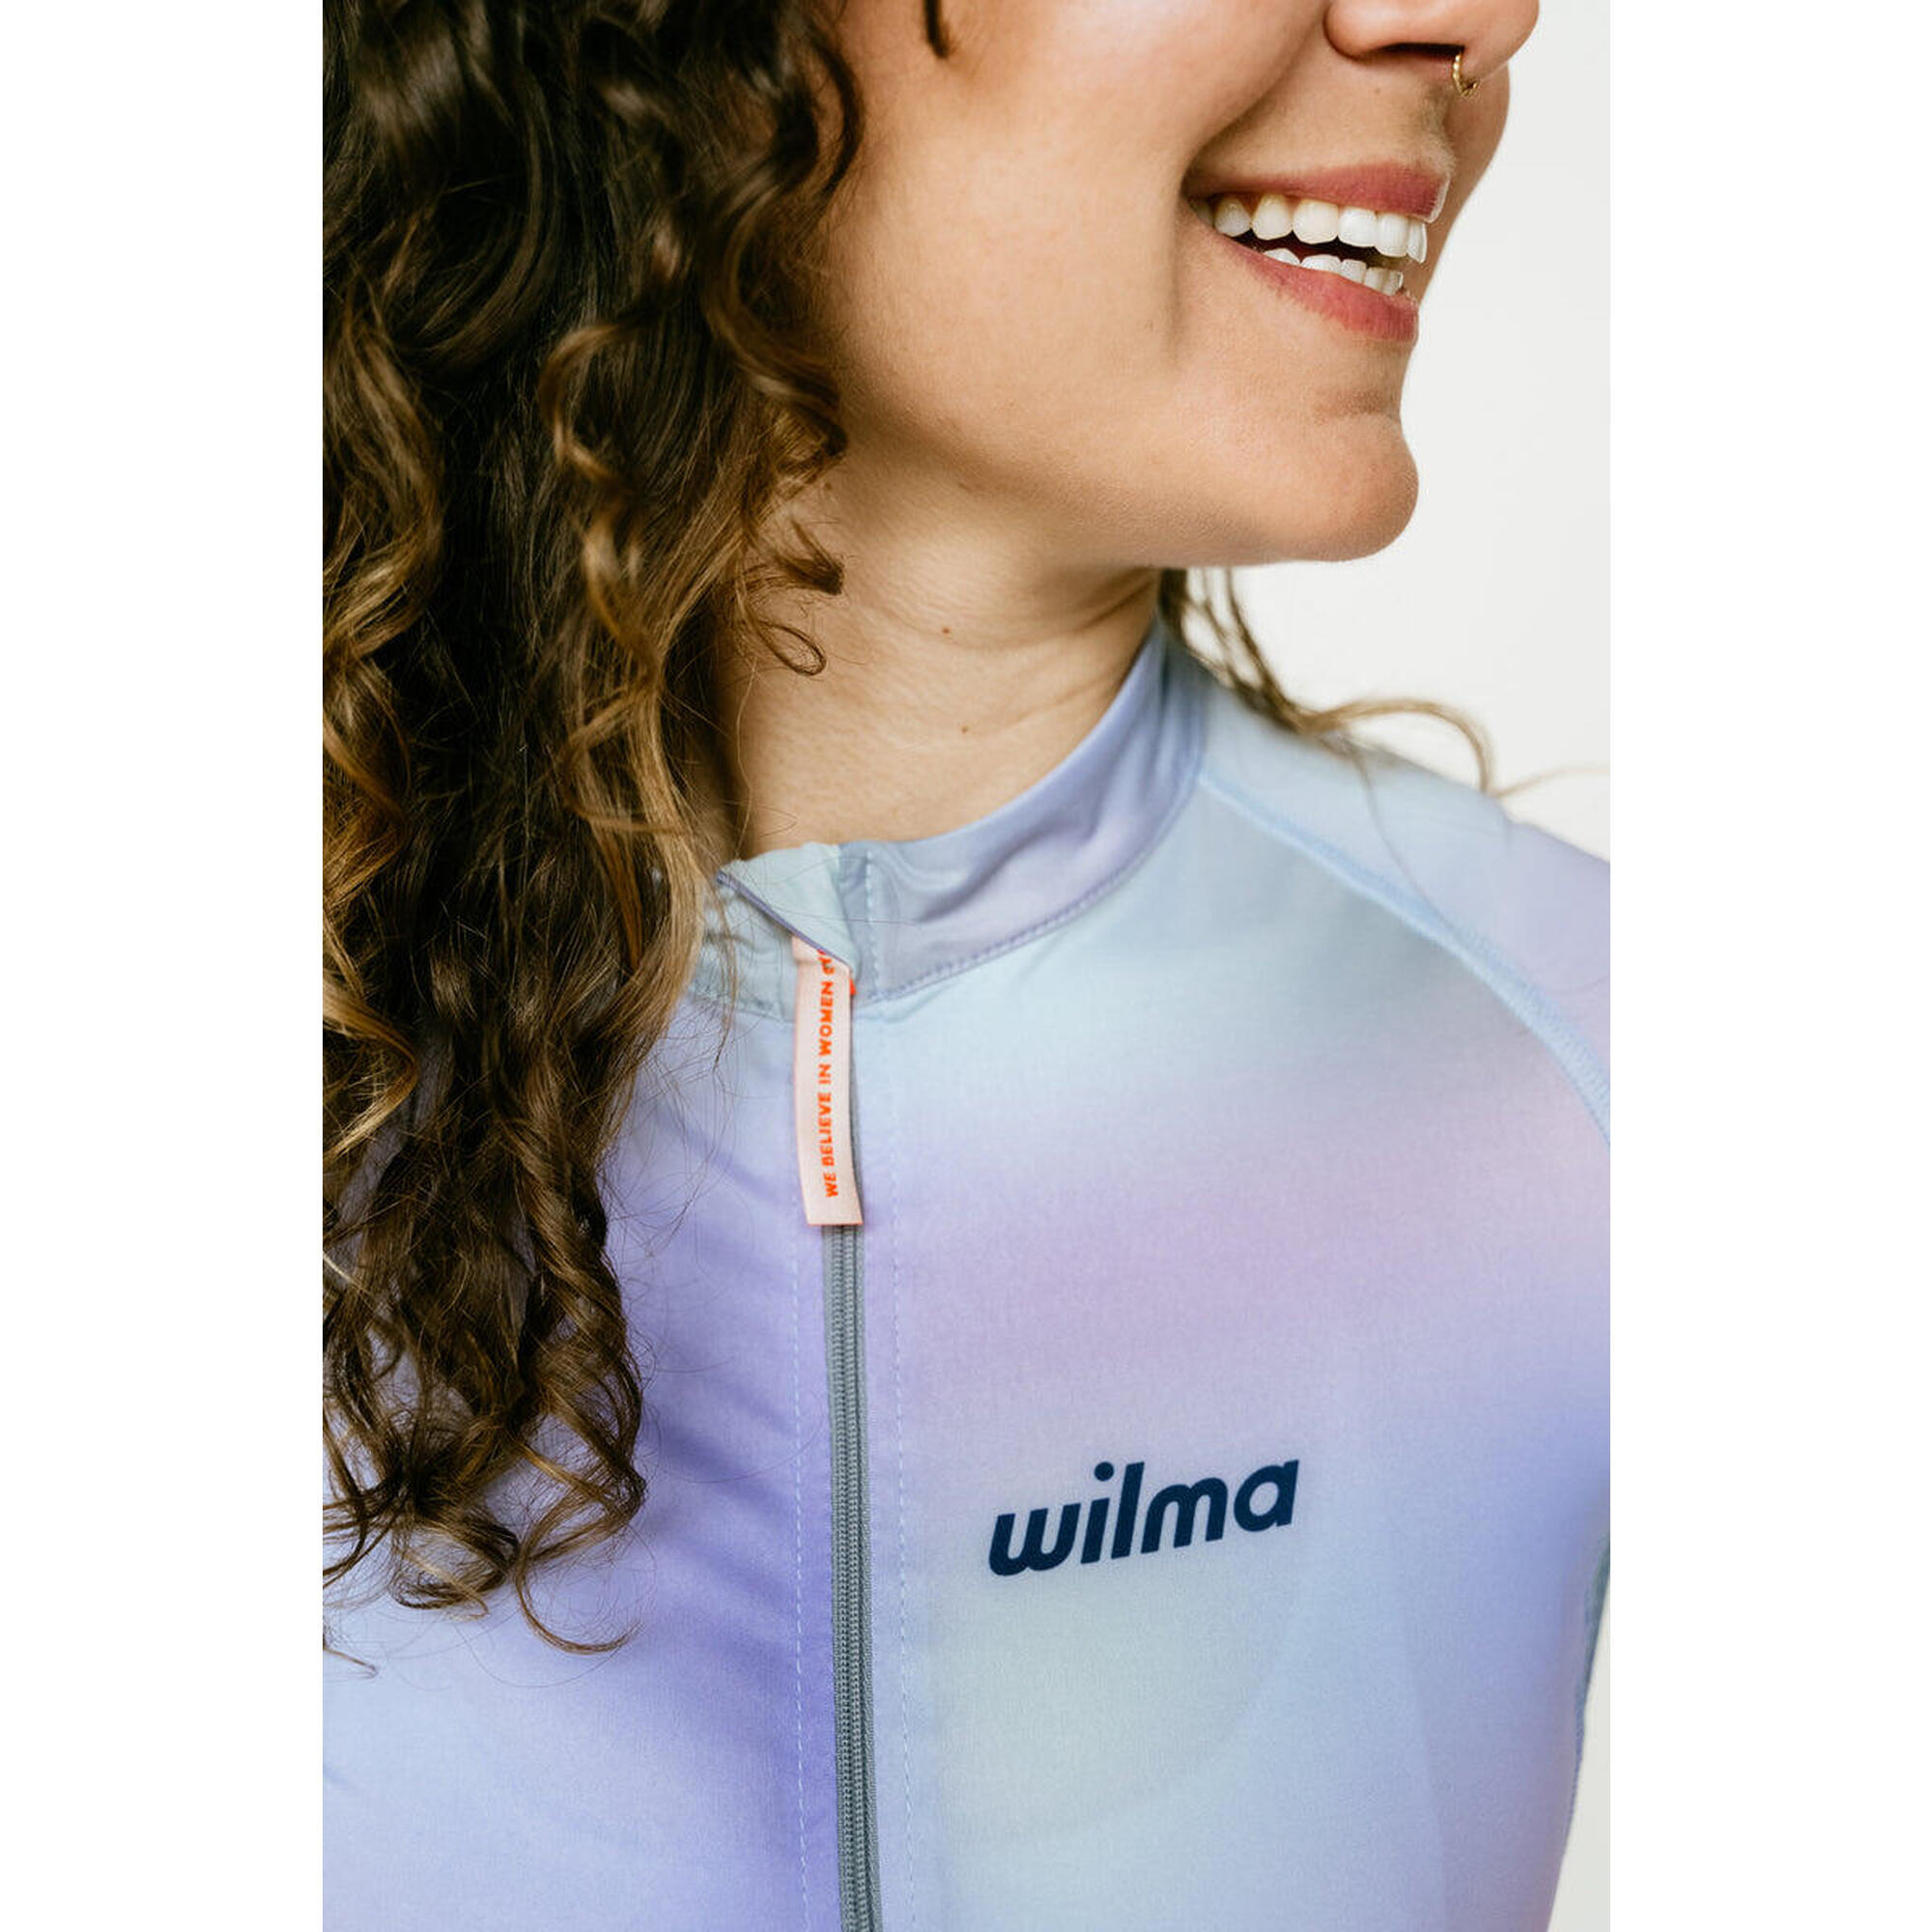 Maillot Cyclisme Femme Manches Courtes Ultra Respirant